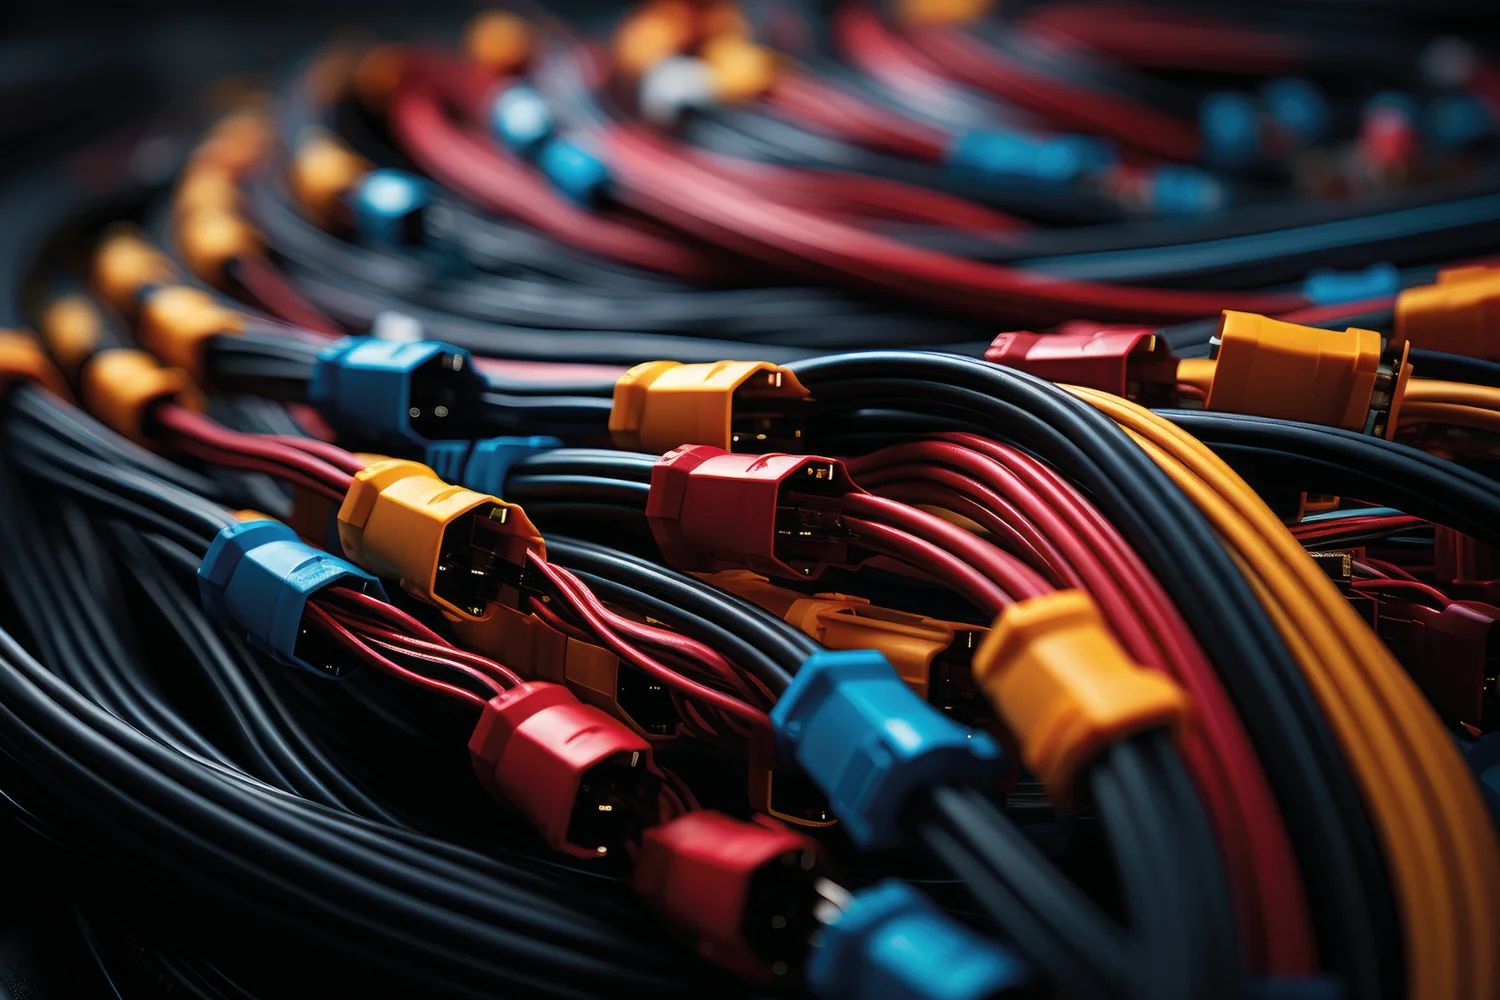 Image 1: Example of possible applications of Crastin® PBT: Colorful wire harness and plastic connectors for vehicles, automotive industry and manufacturing. @Didiksaputra/stock.adobe.com